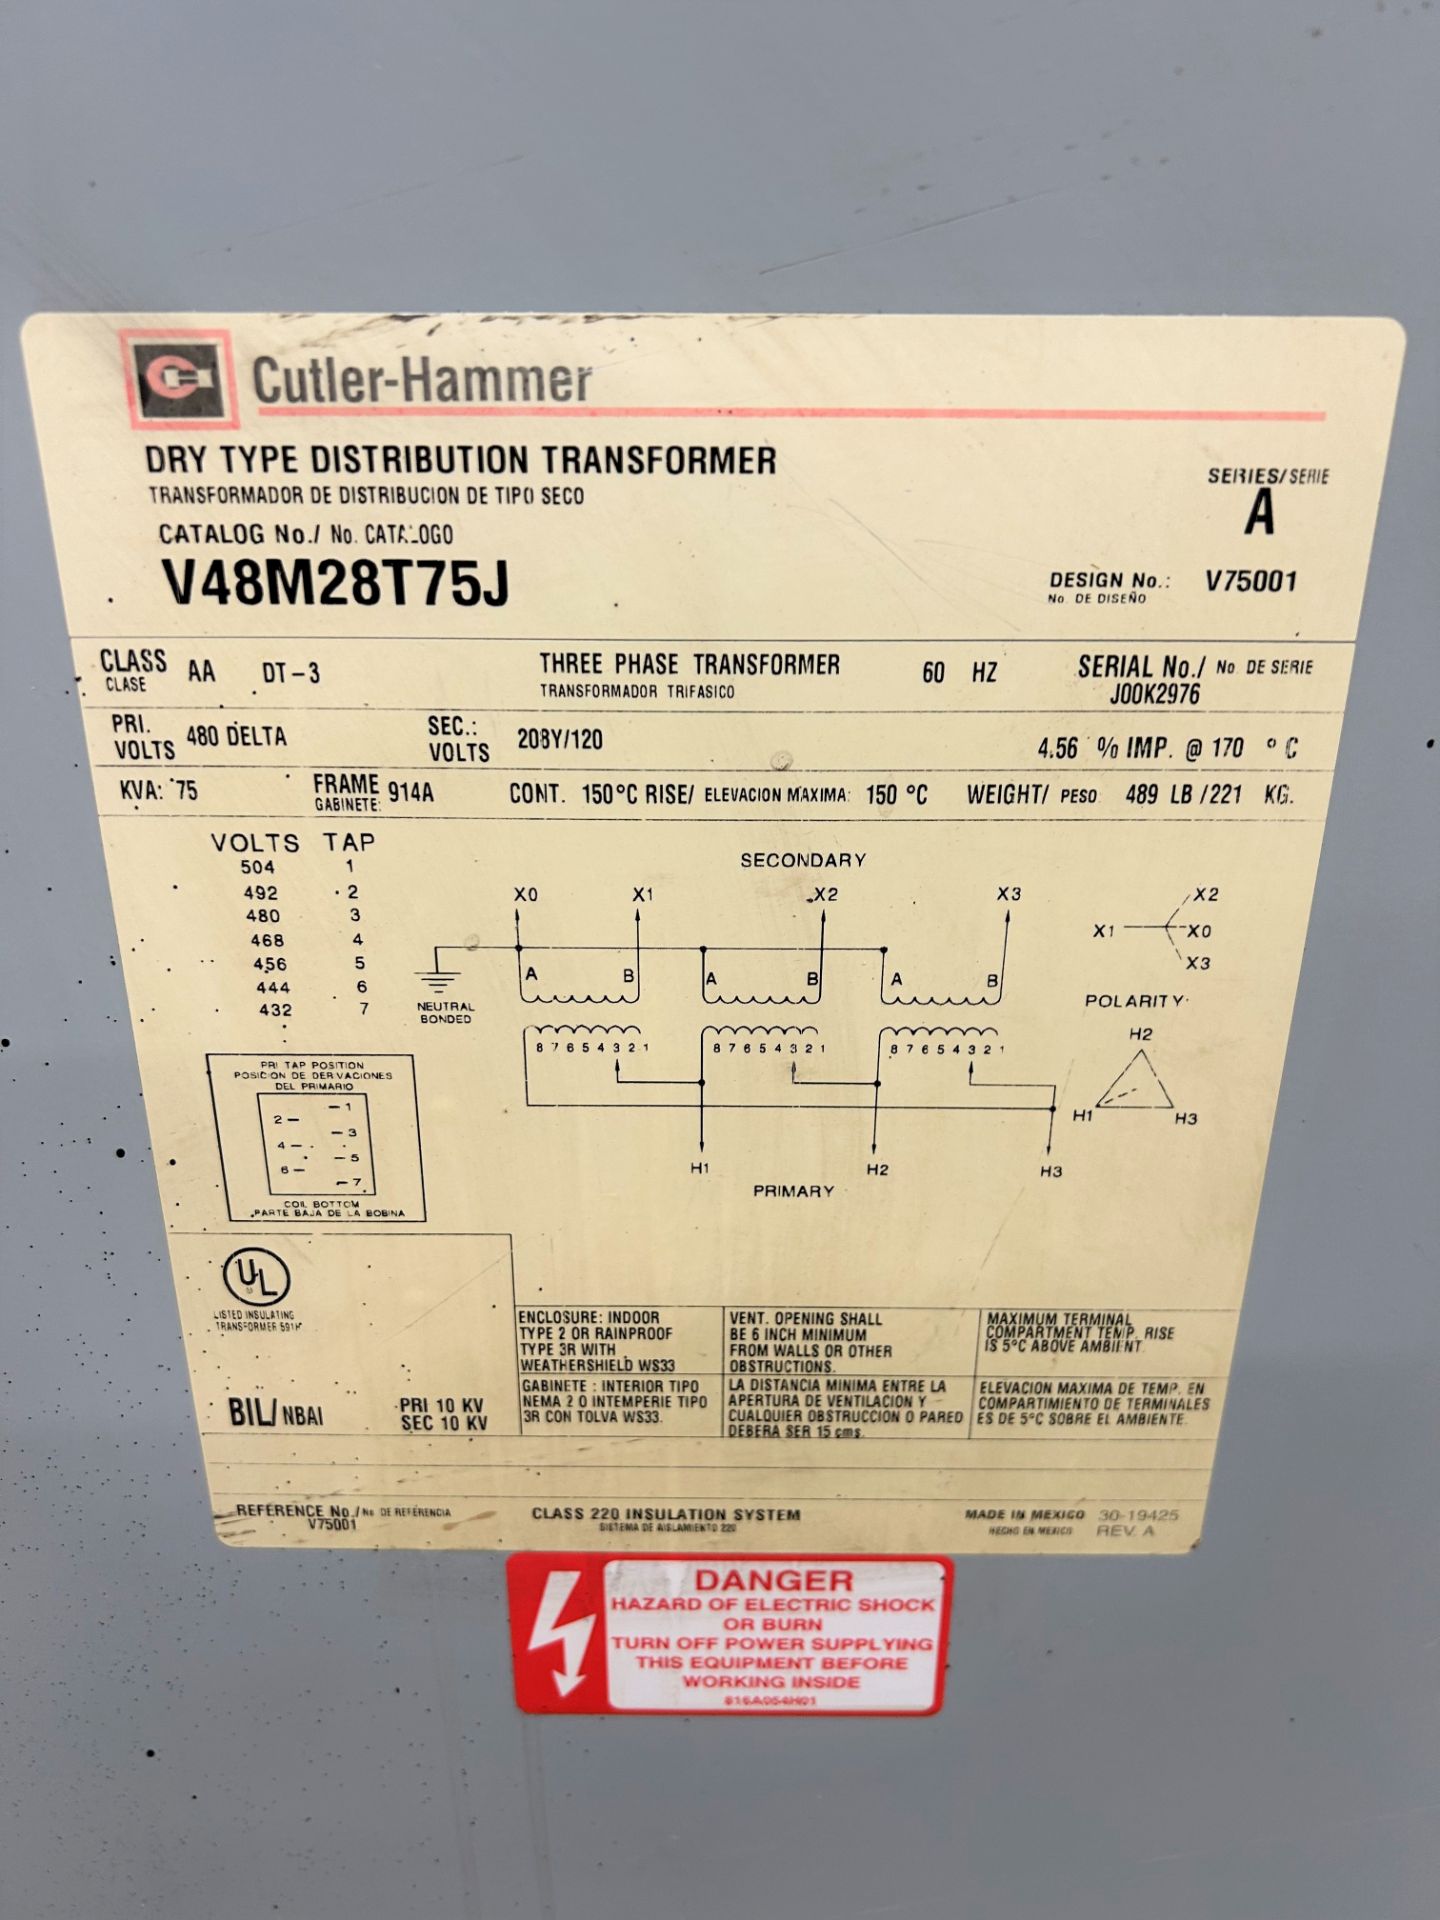 Cutler-Hammer Dry Type 3-Phase Transformer - Image 2 of 2